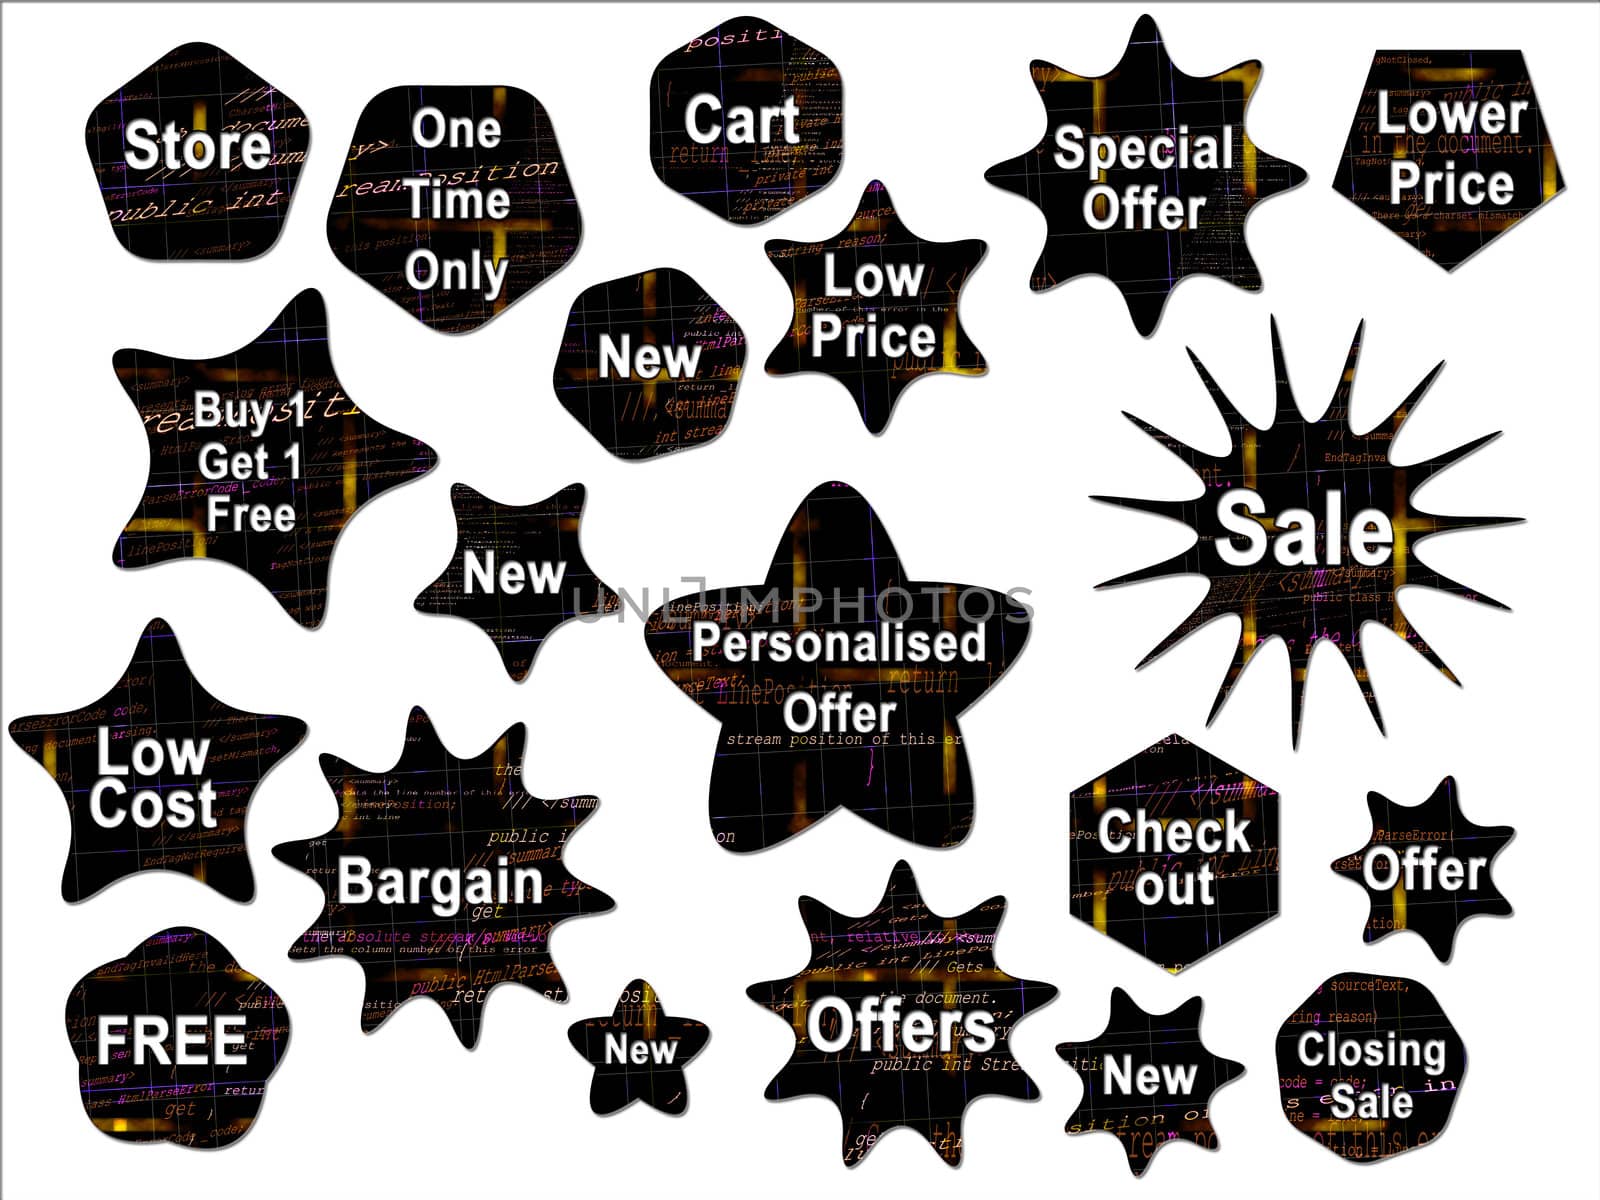 Orange and Yellow Programming Code Source For Sale Special Price Button Shapes